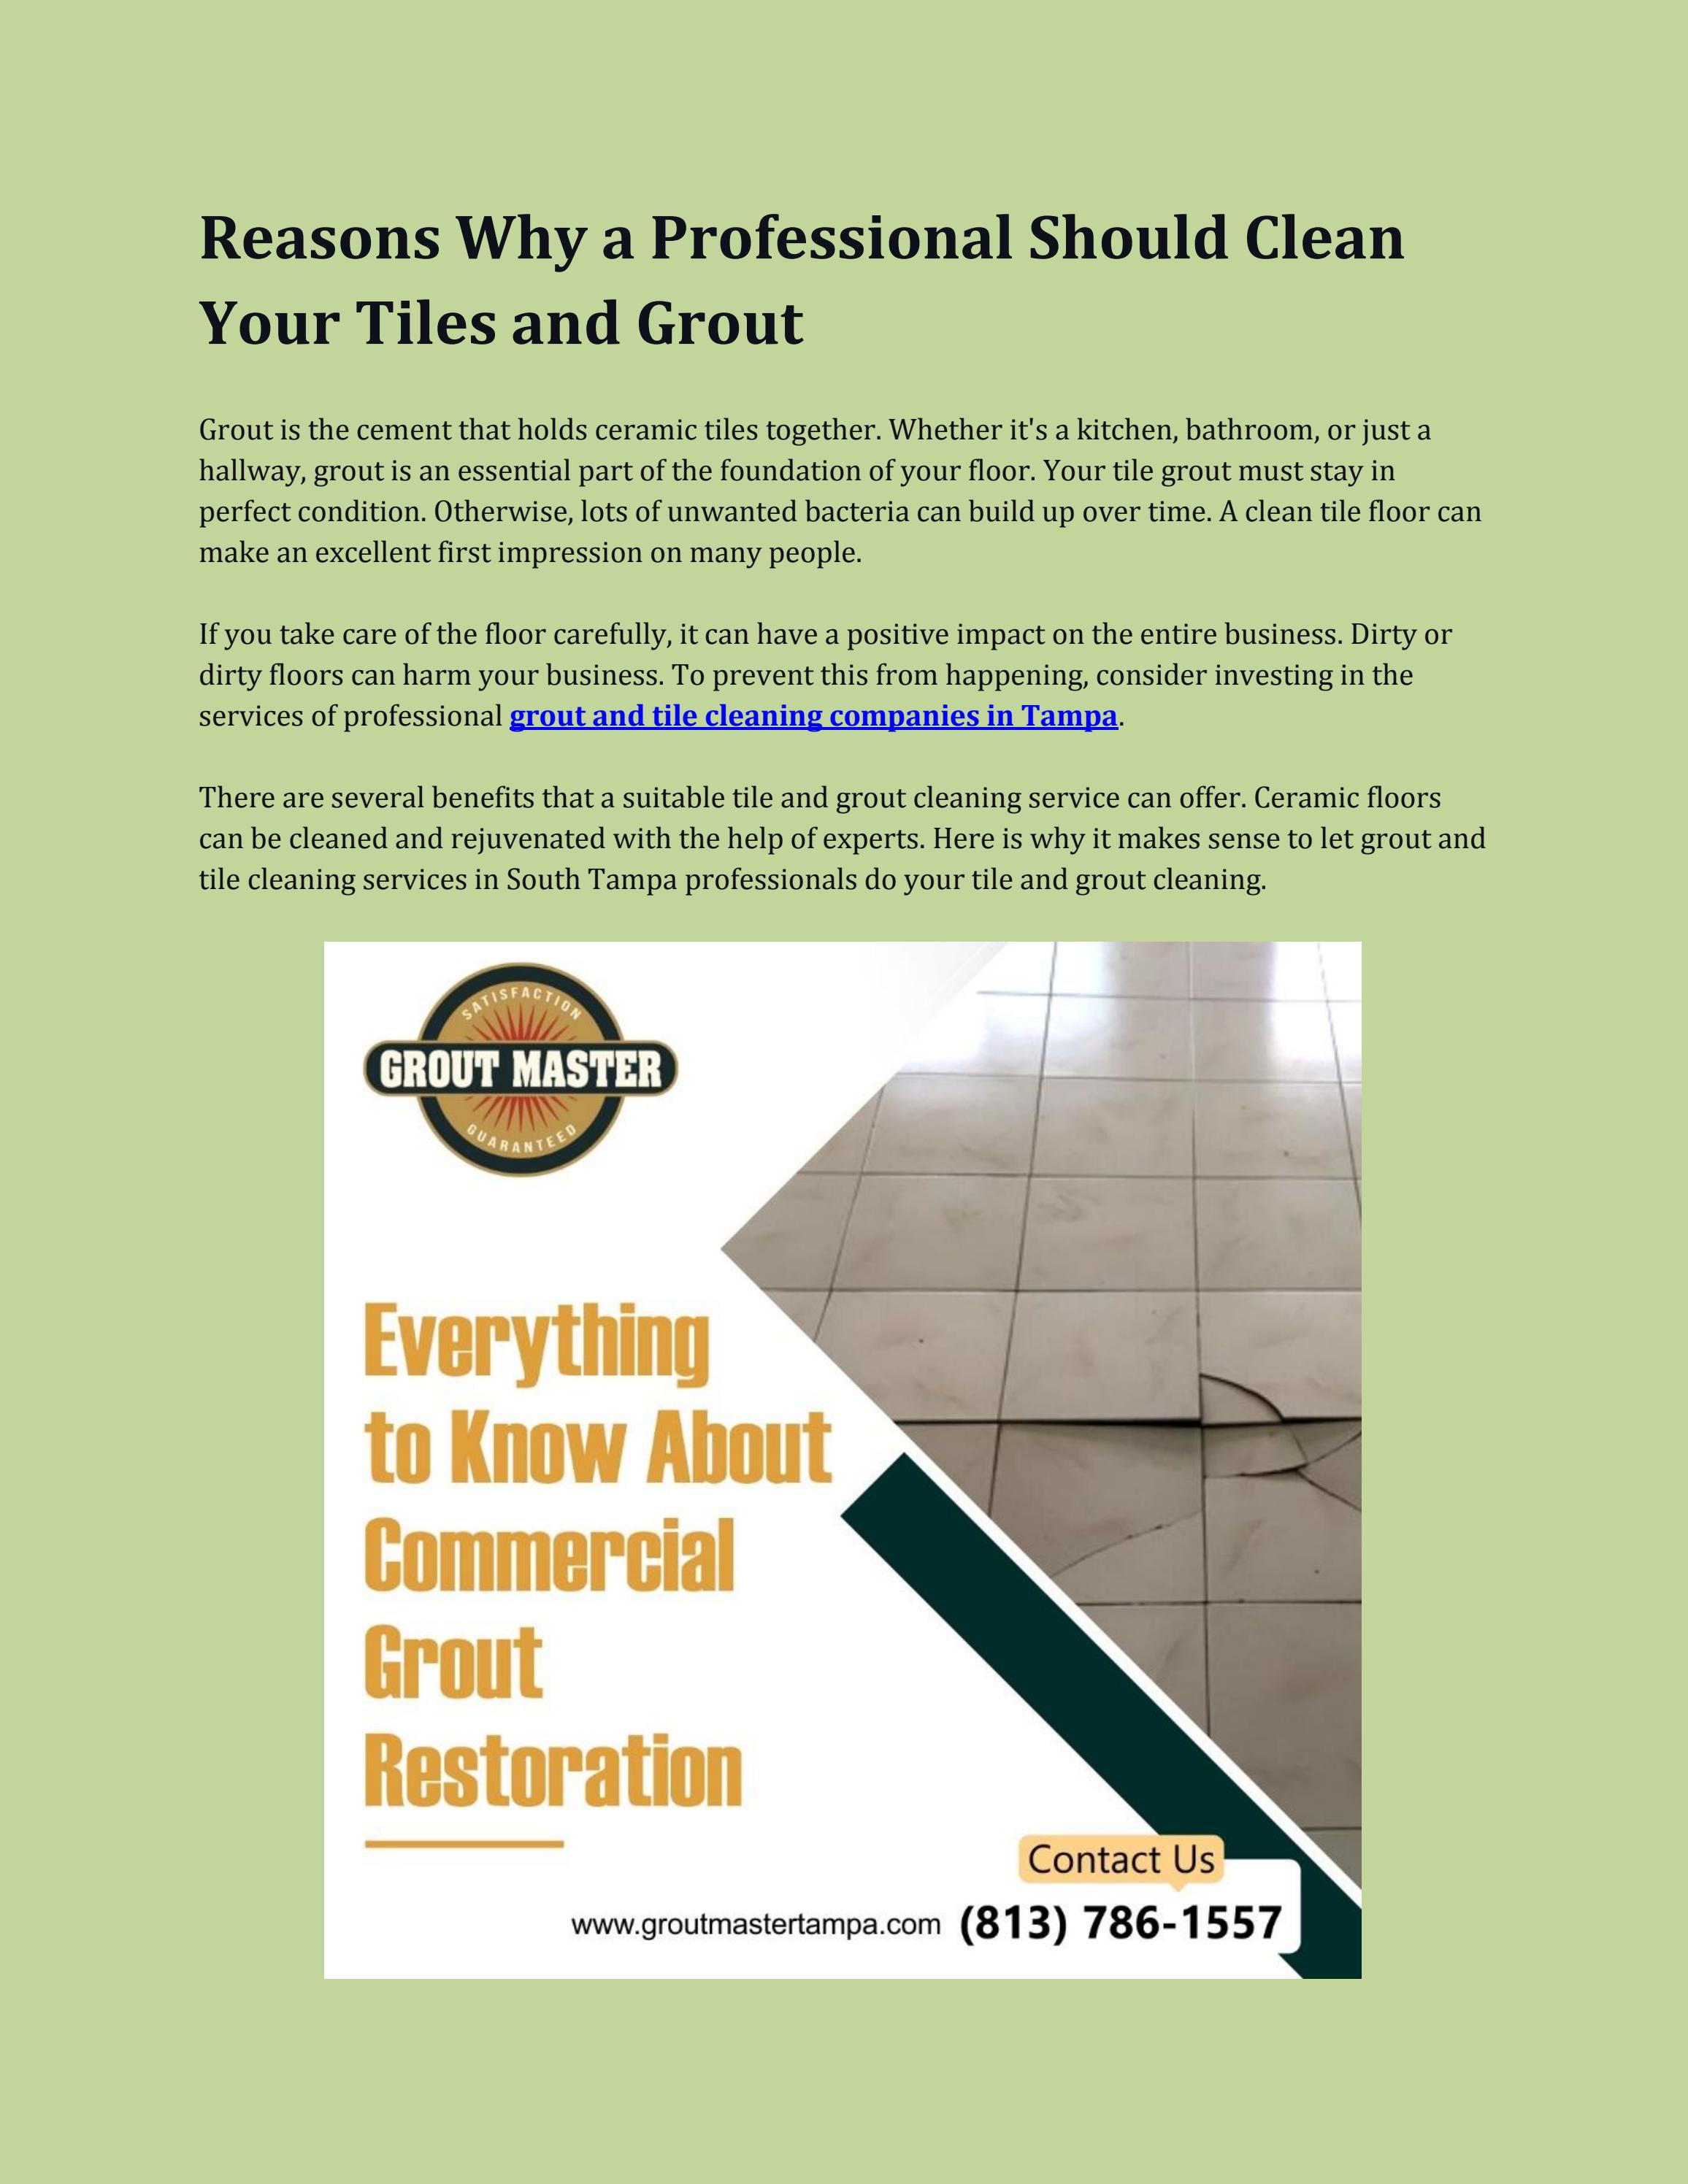 Reasons Why a Professional Should Clean Your Tiles and Grout